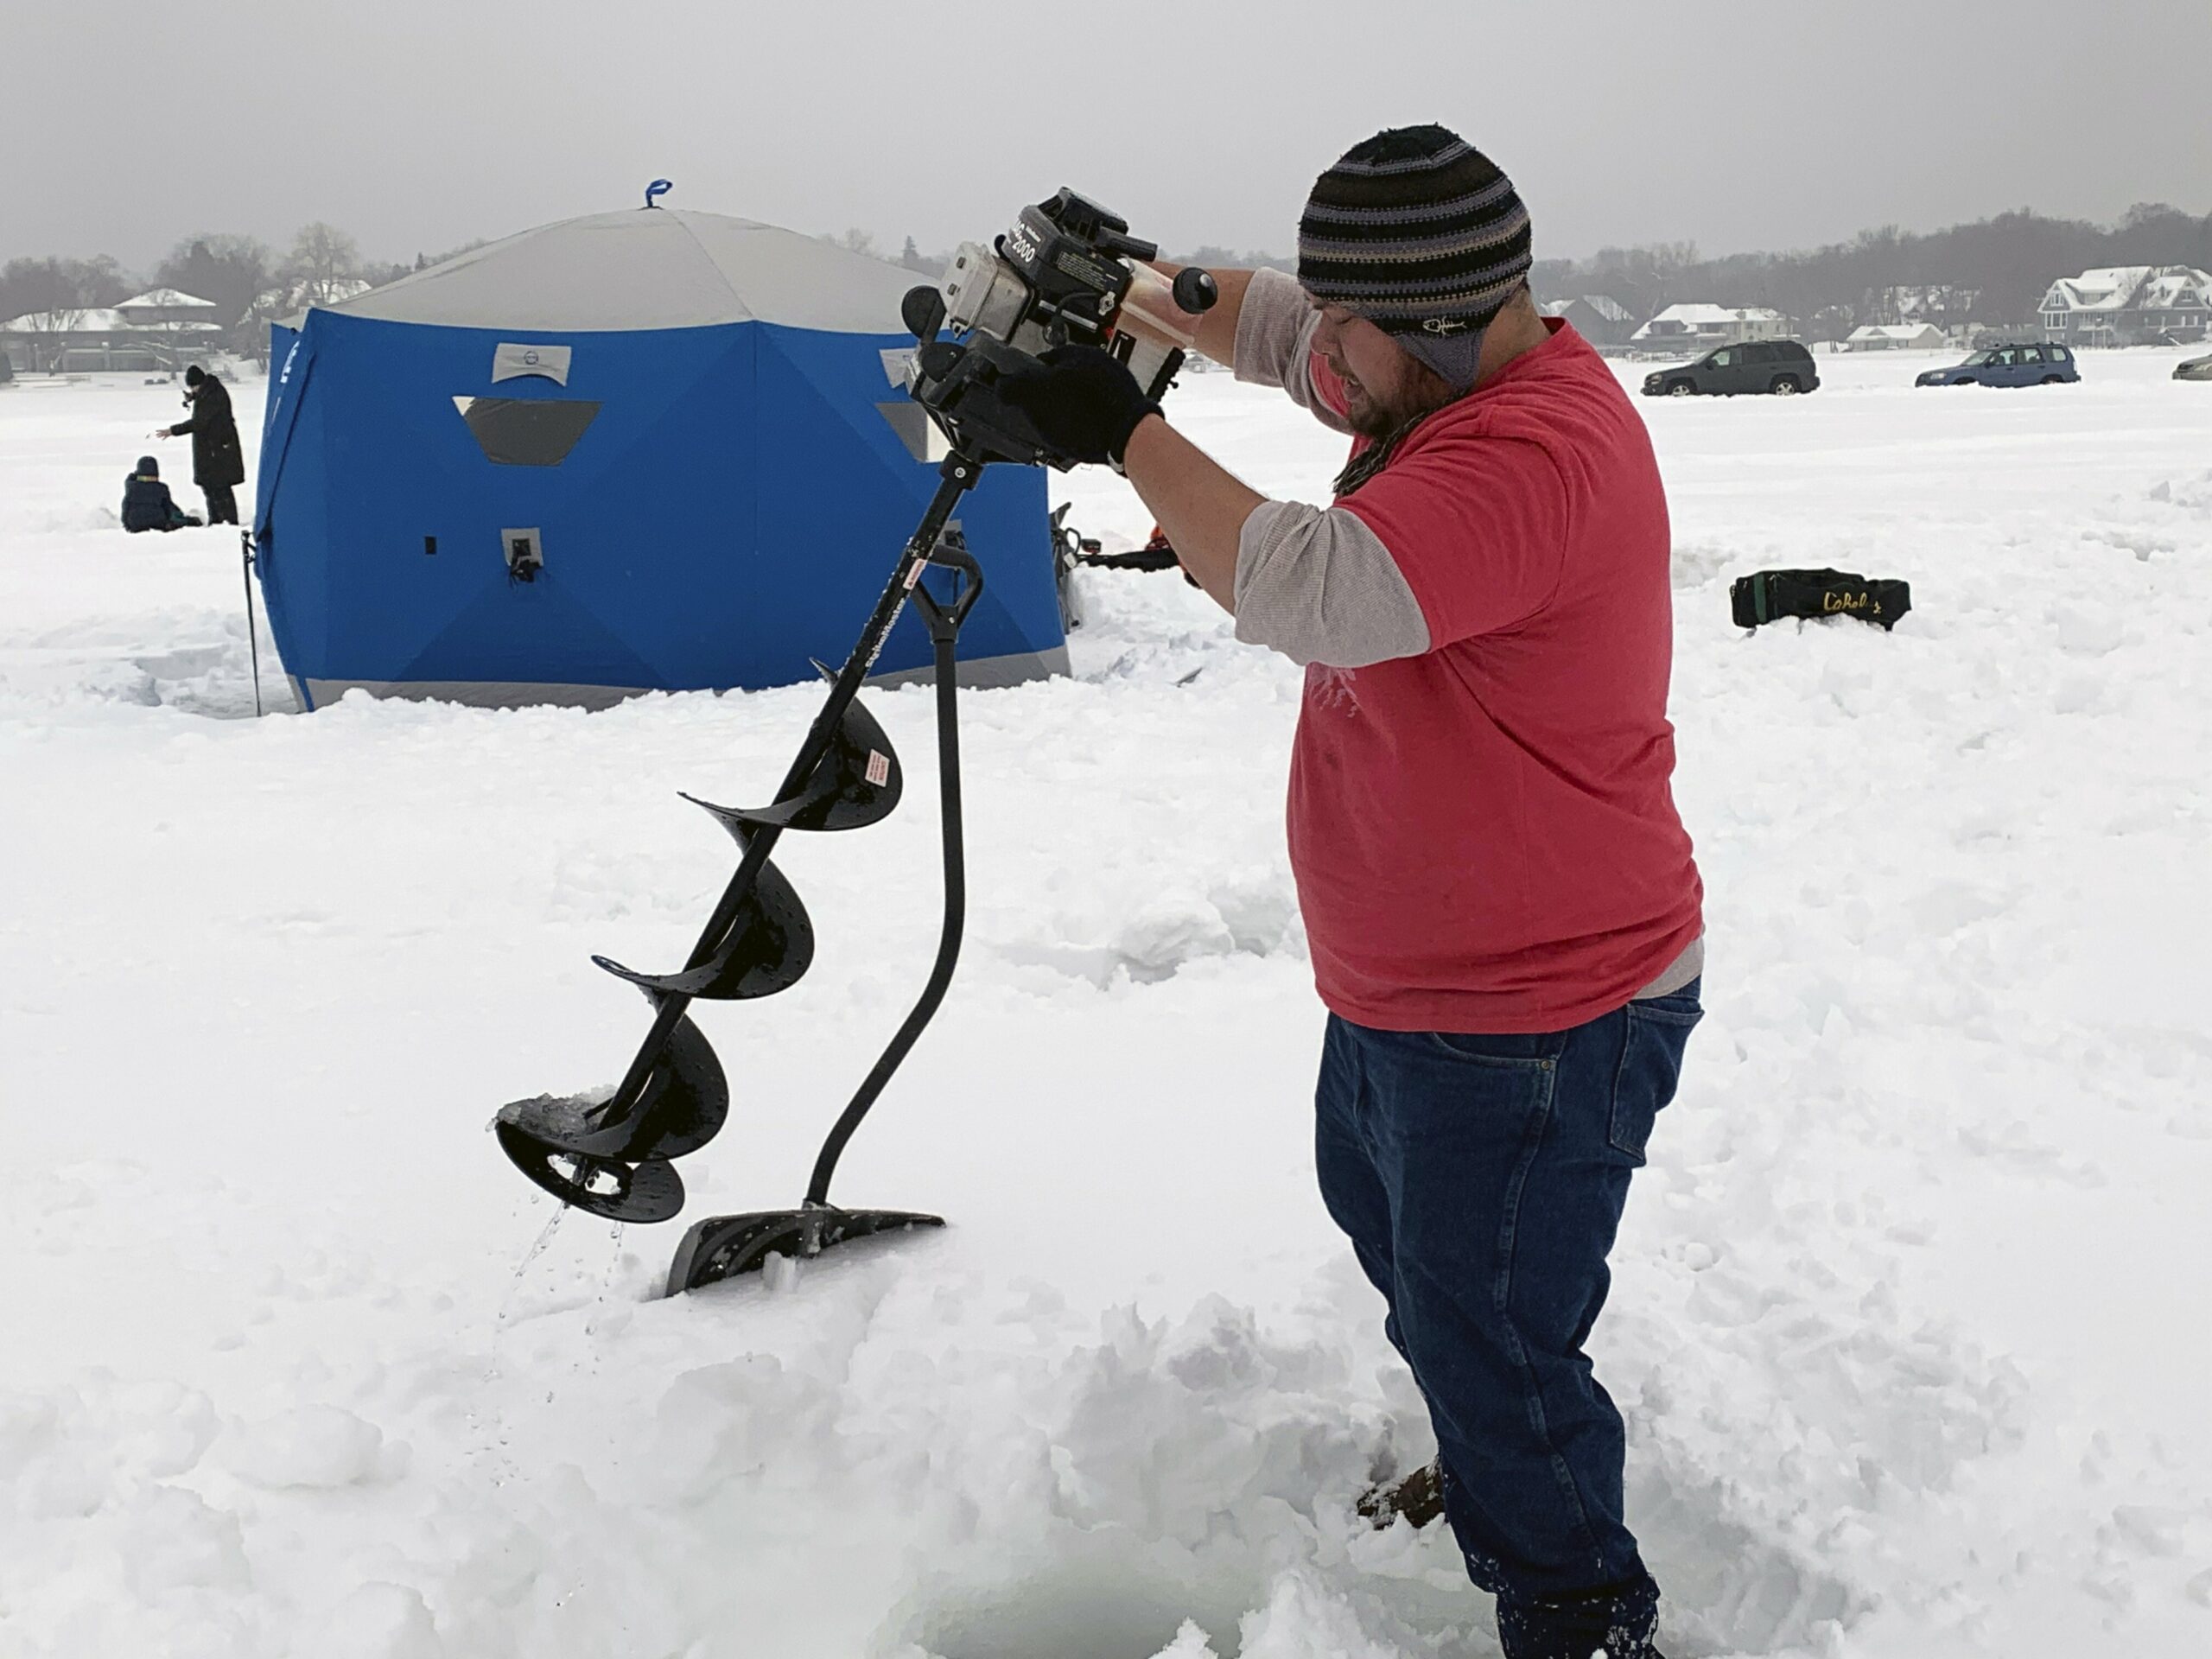 Jason Kong uses an auger to drill holes in Lake Minnetonka to ice fish